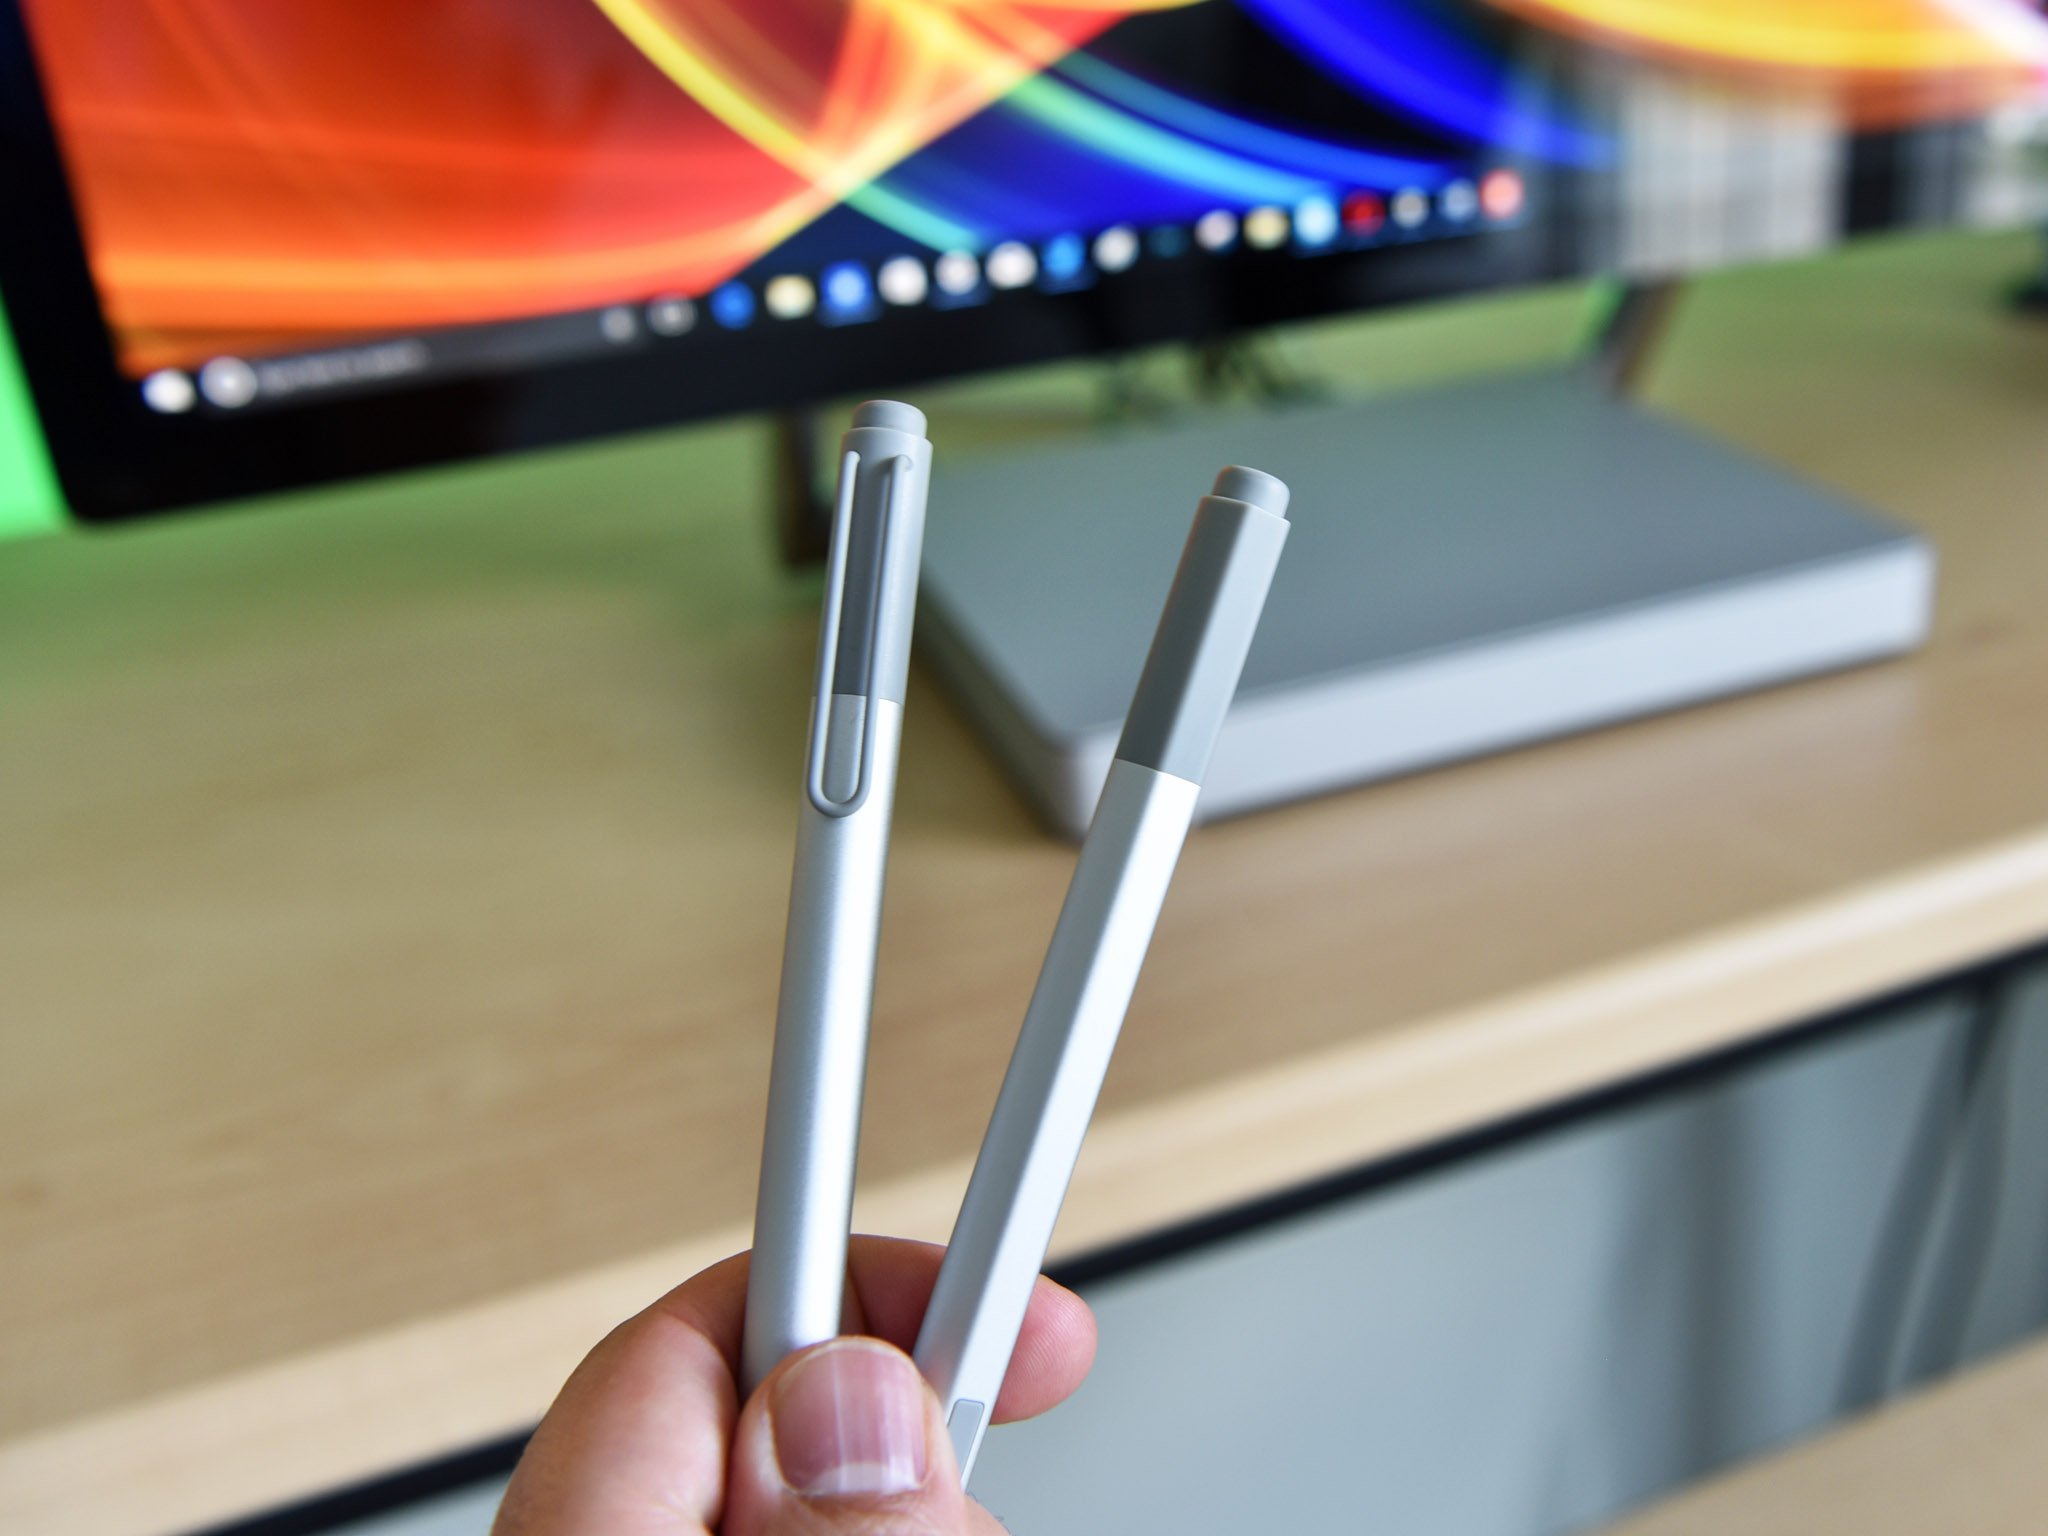 Future Surface Pen could be powered from the light on your device's display